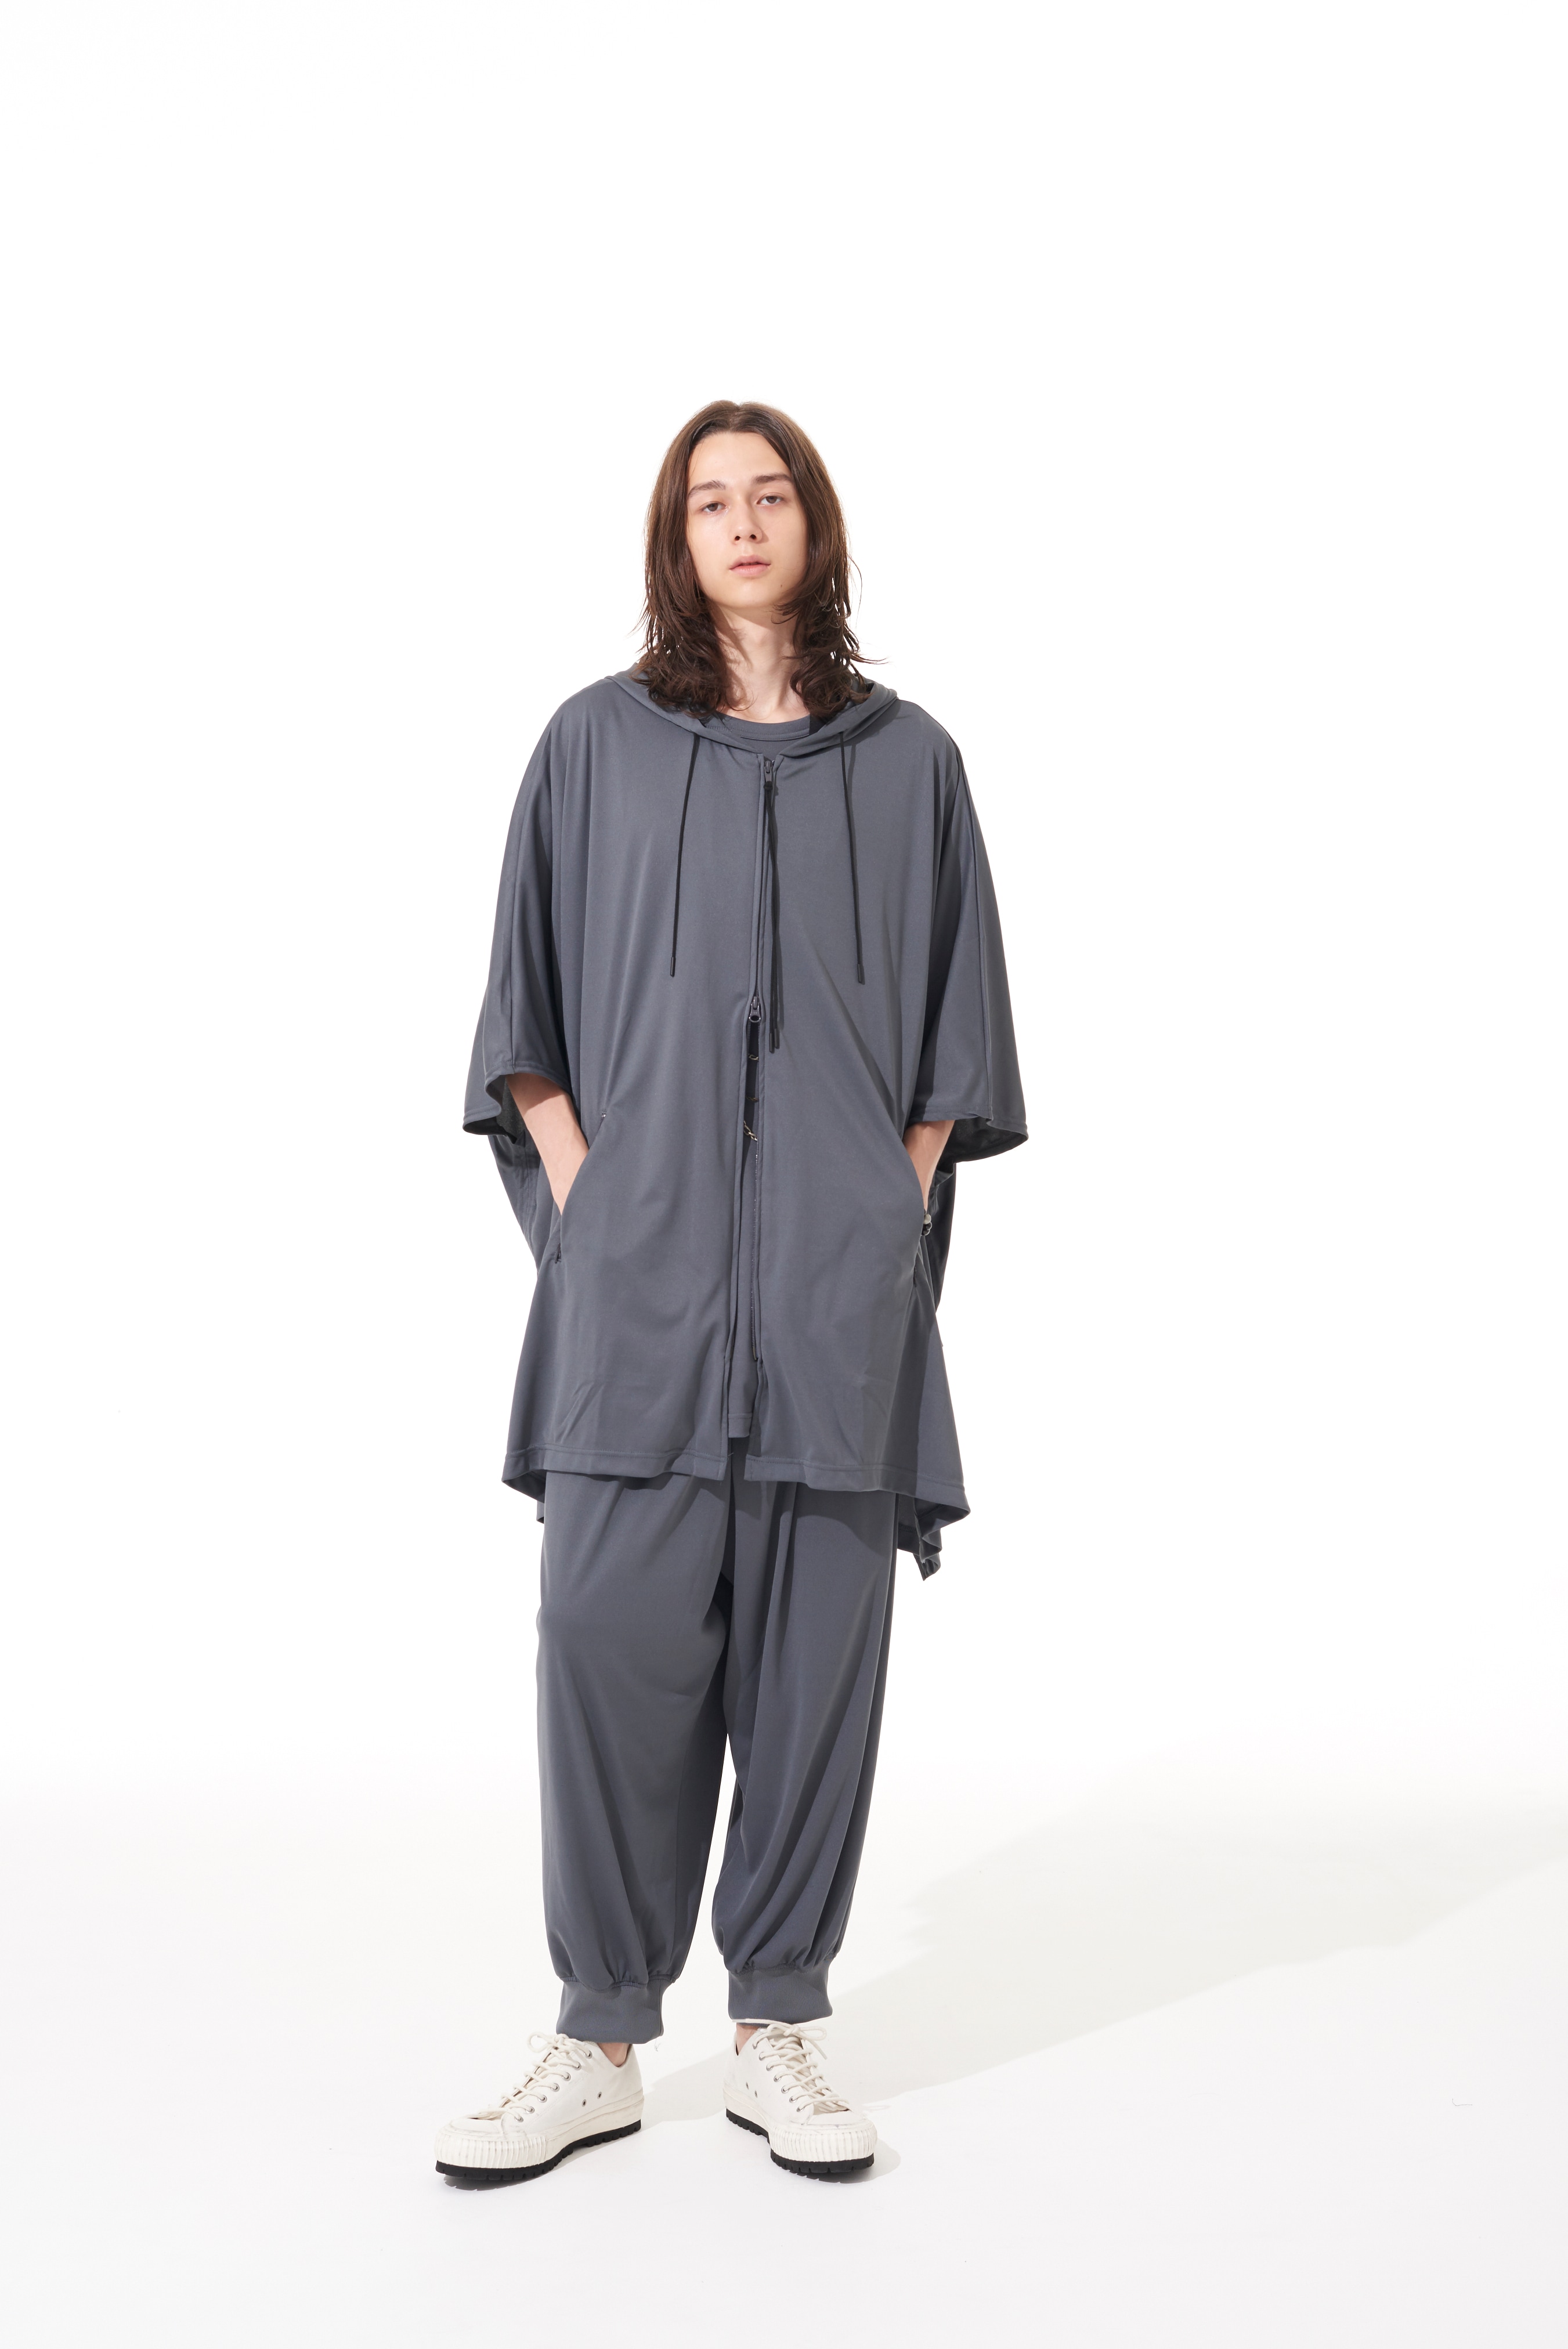 HIGH-GAUGE POLYESTER SMOOTH JERSEY HOODIE PONCHO(M Gray): S'YTE 